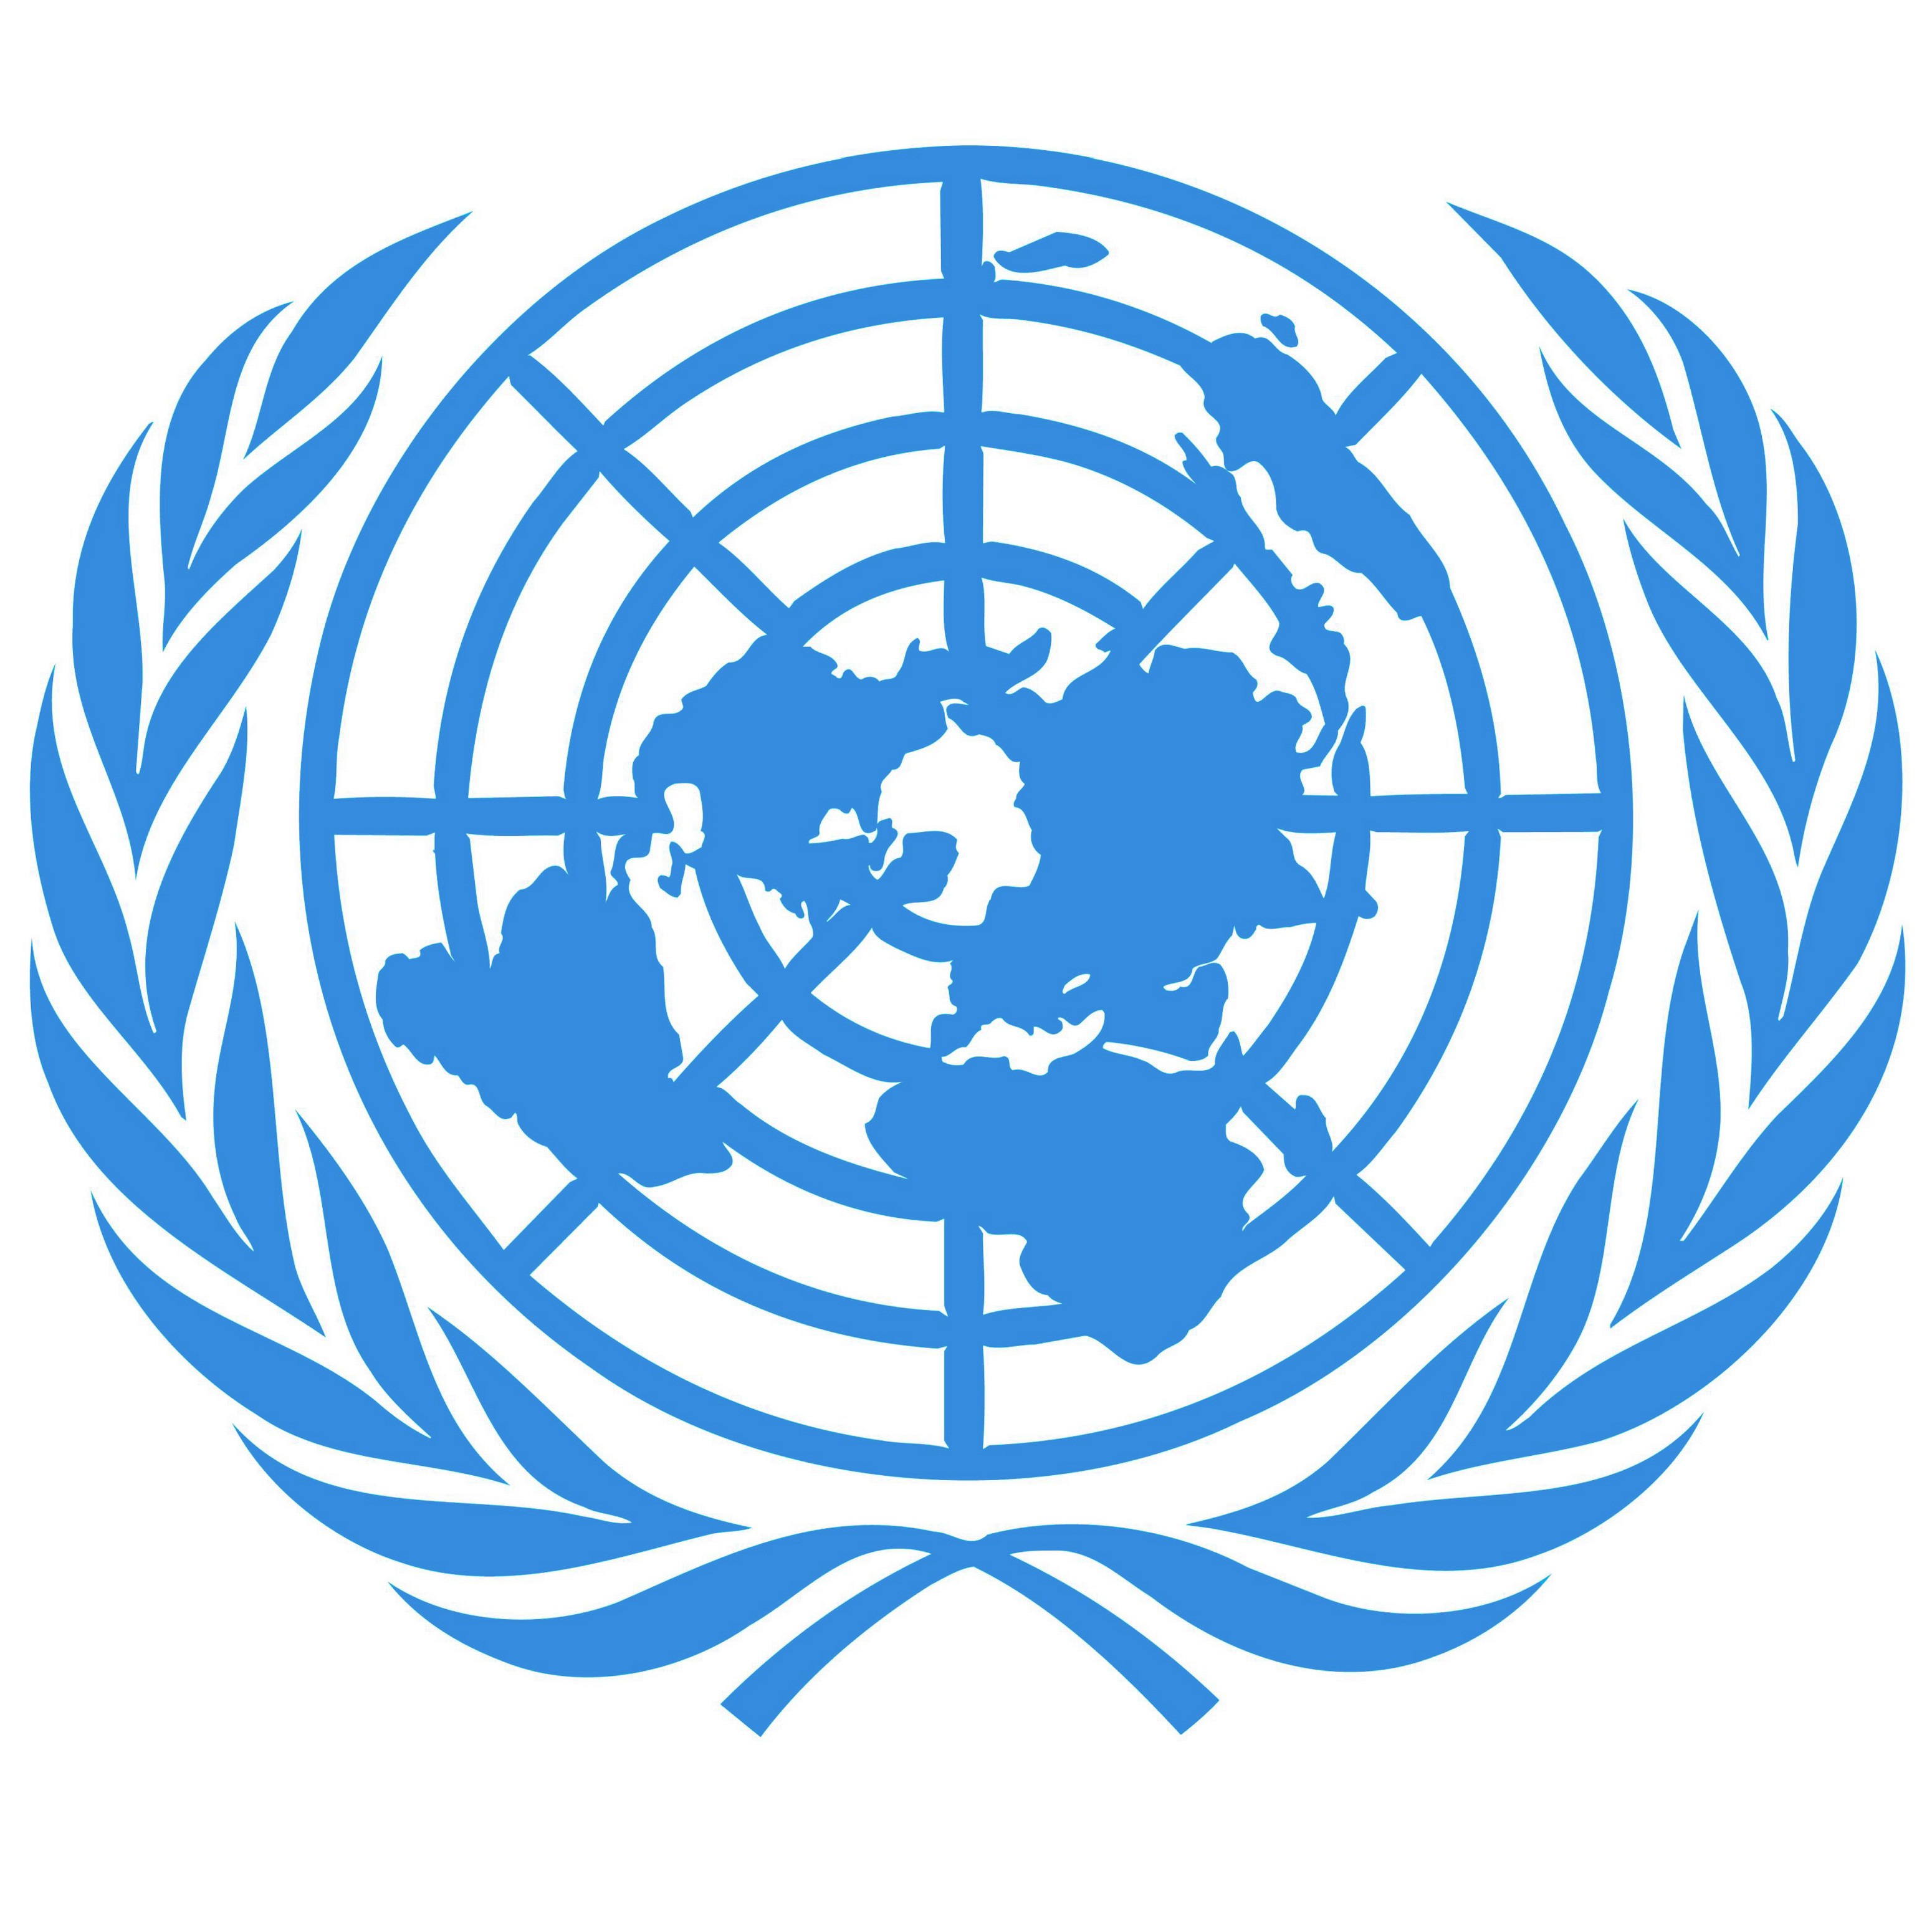 1000+ images about United Nations Logos